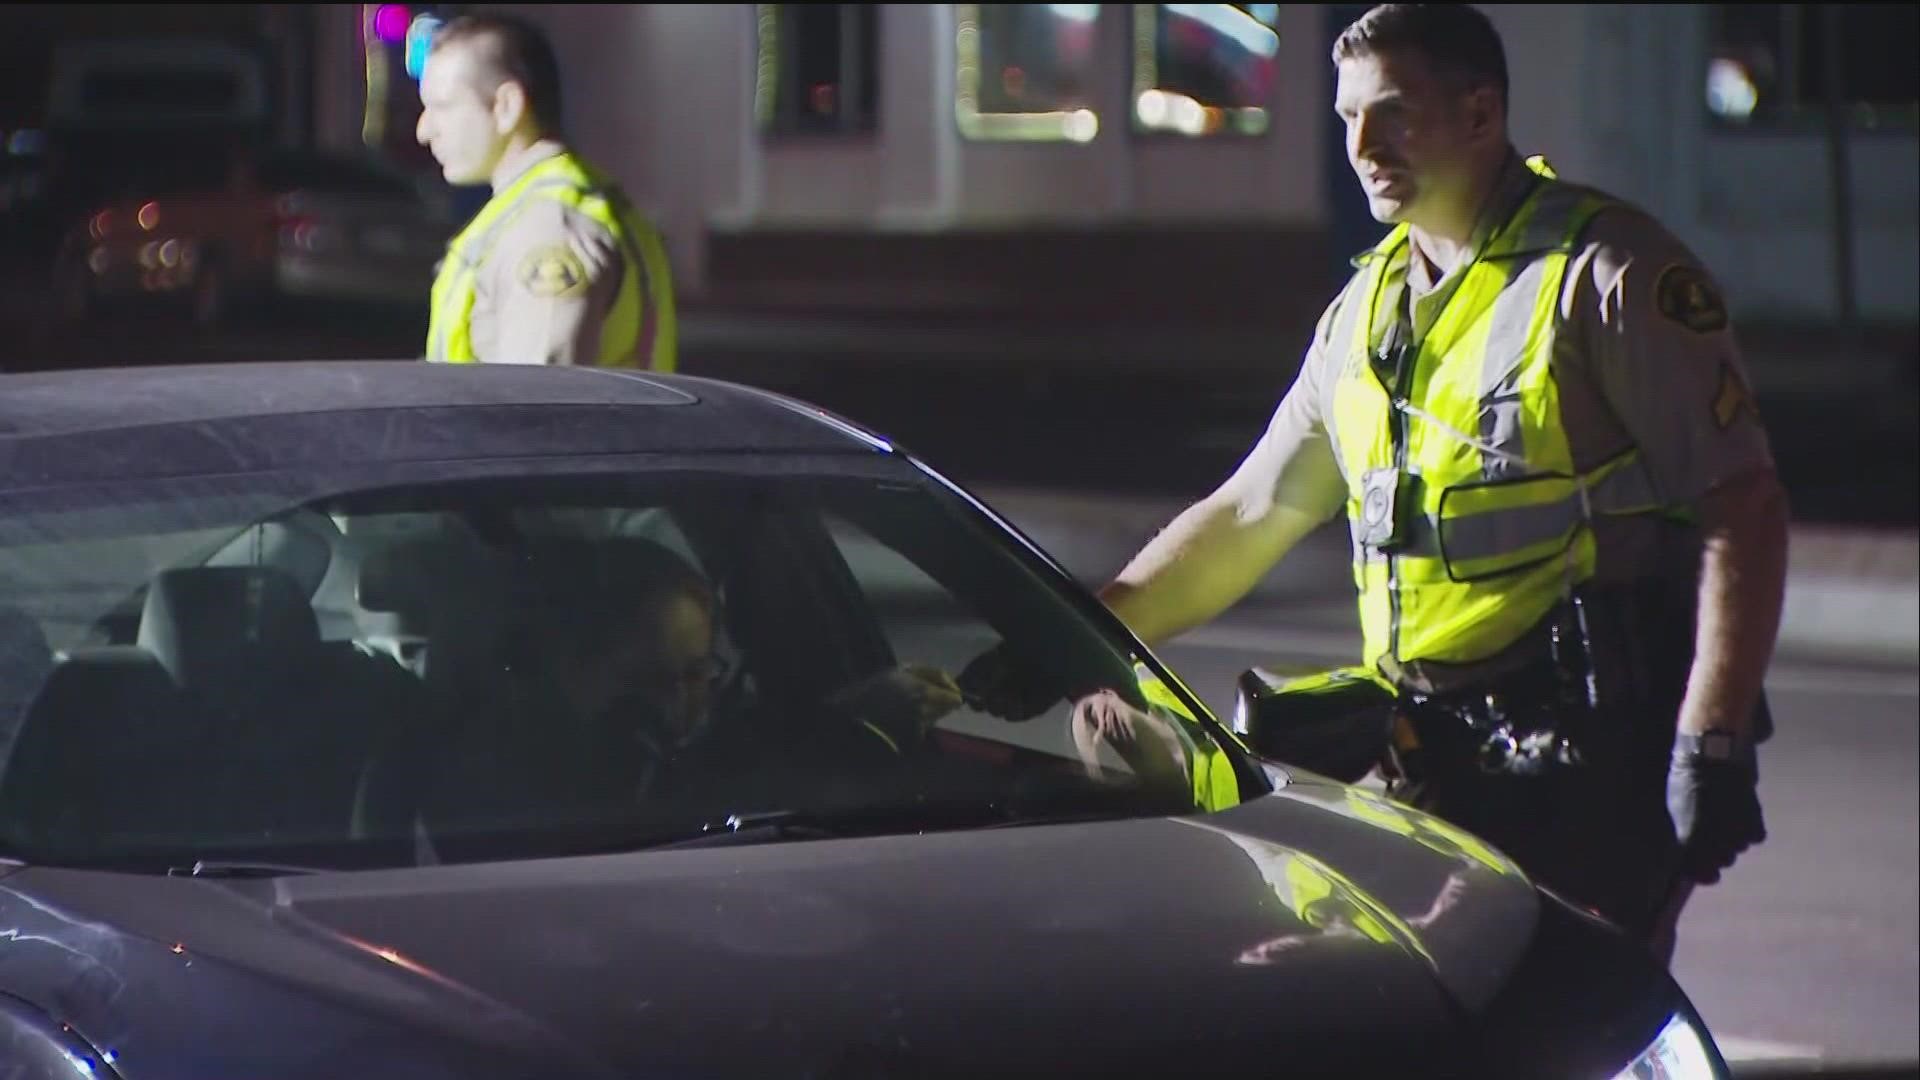 California Highway Patrol officers have made 291 DUI arrests the first night of the maximum